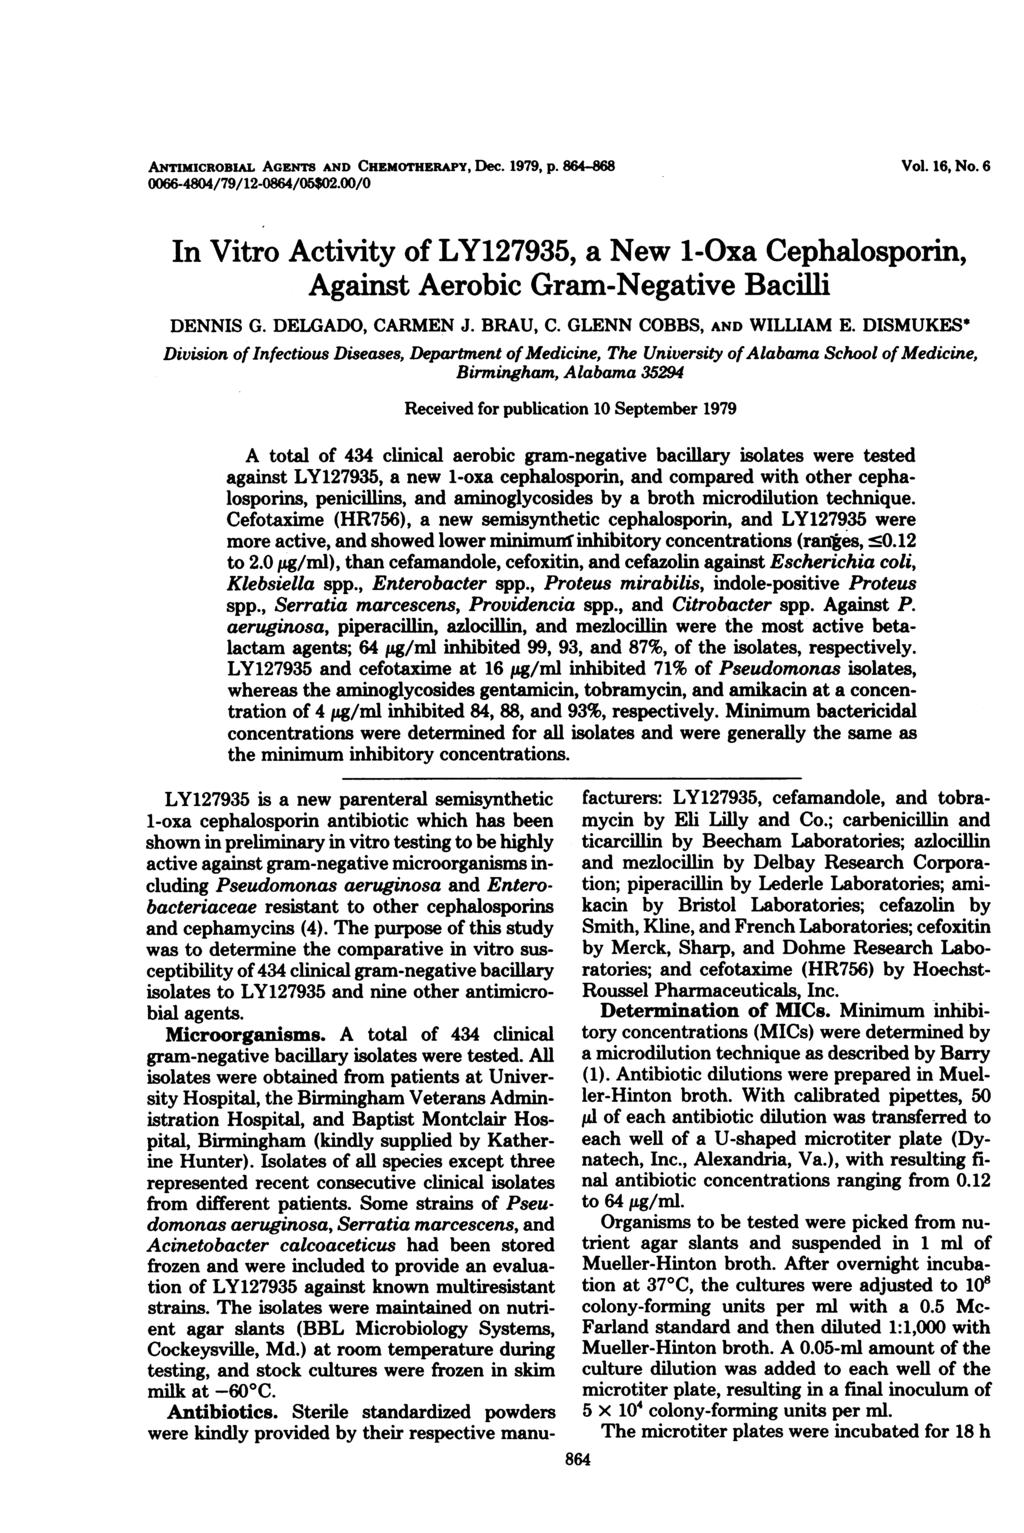 ANTIMICROBIAL AGENTS AND CHEMOTHERAPY, Dec. 1979, p. 6-6 0066-0/79/1-06/05$0.00/0 Vol., No. 6 In Vitro Activity of LY17935, a New 1-Oxa Cephalosporin, Against Aerobic Gram-Negative Bacilli DENNIS G.